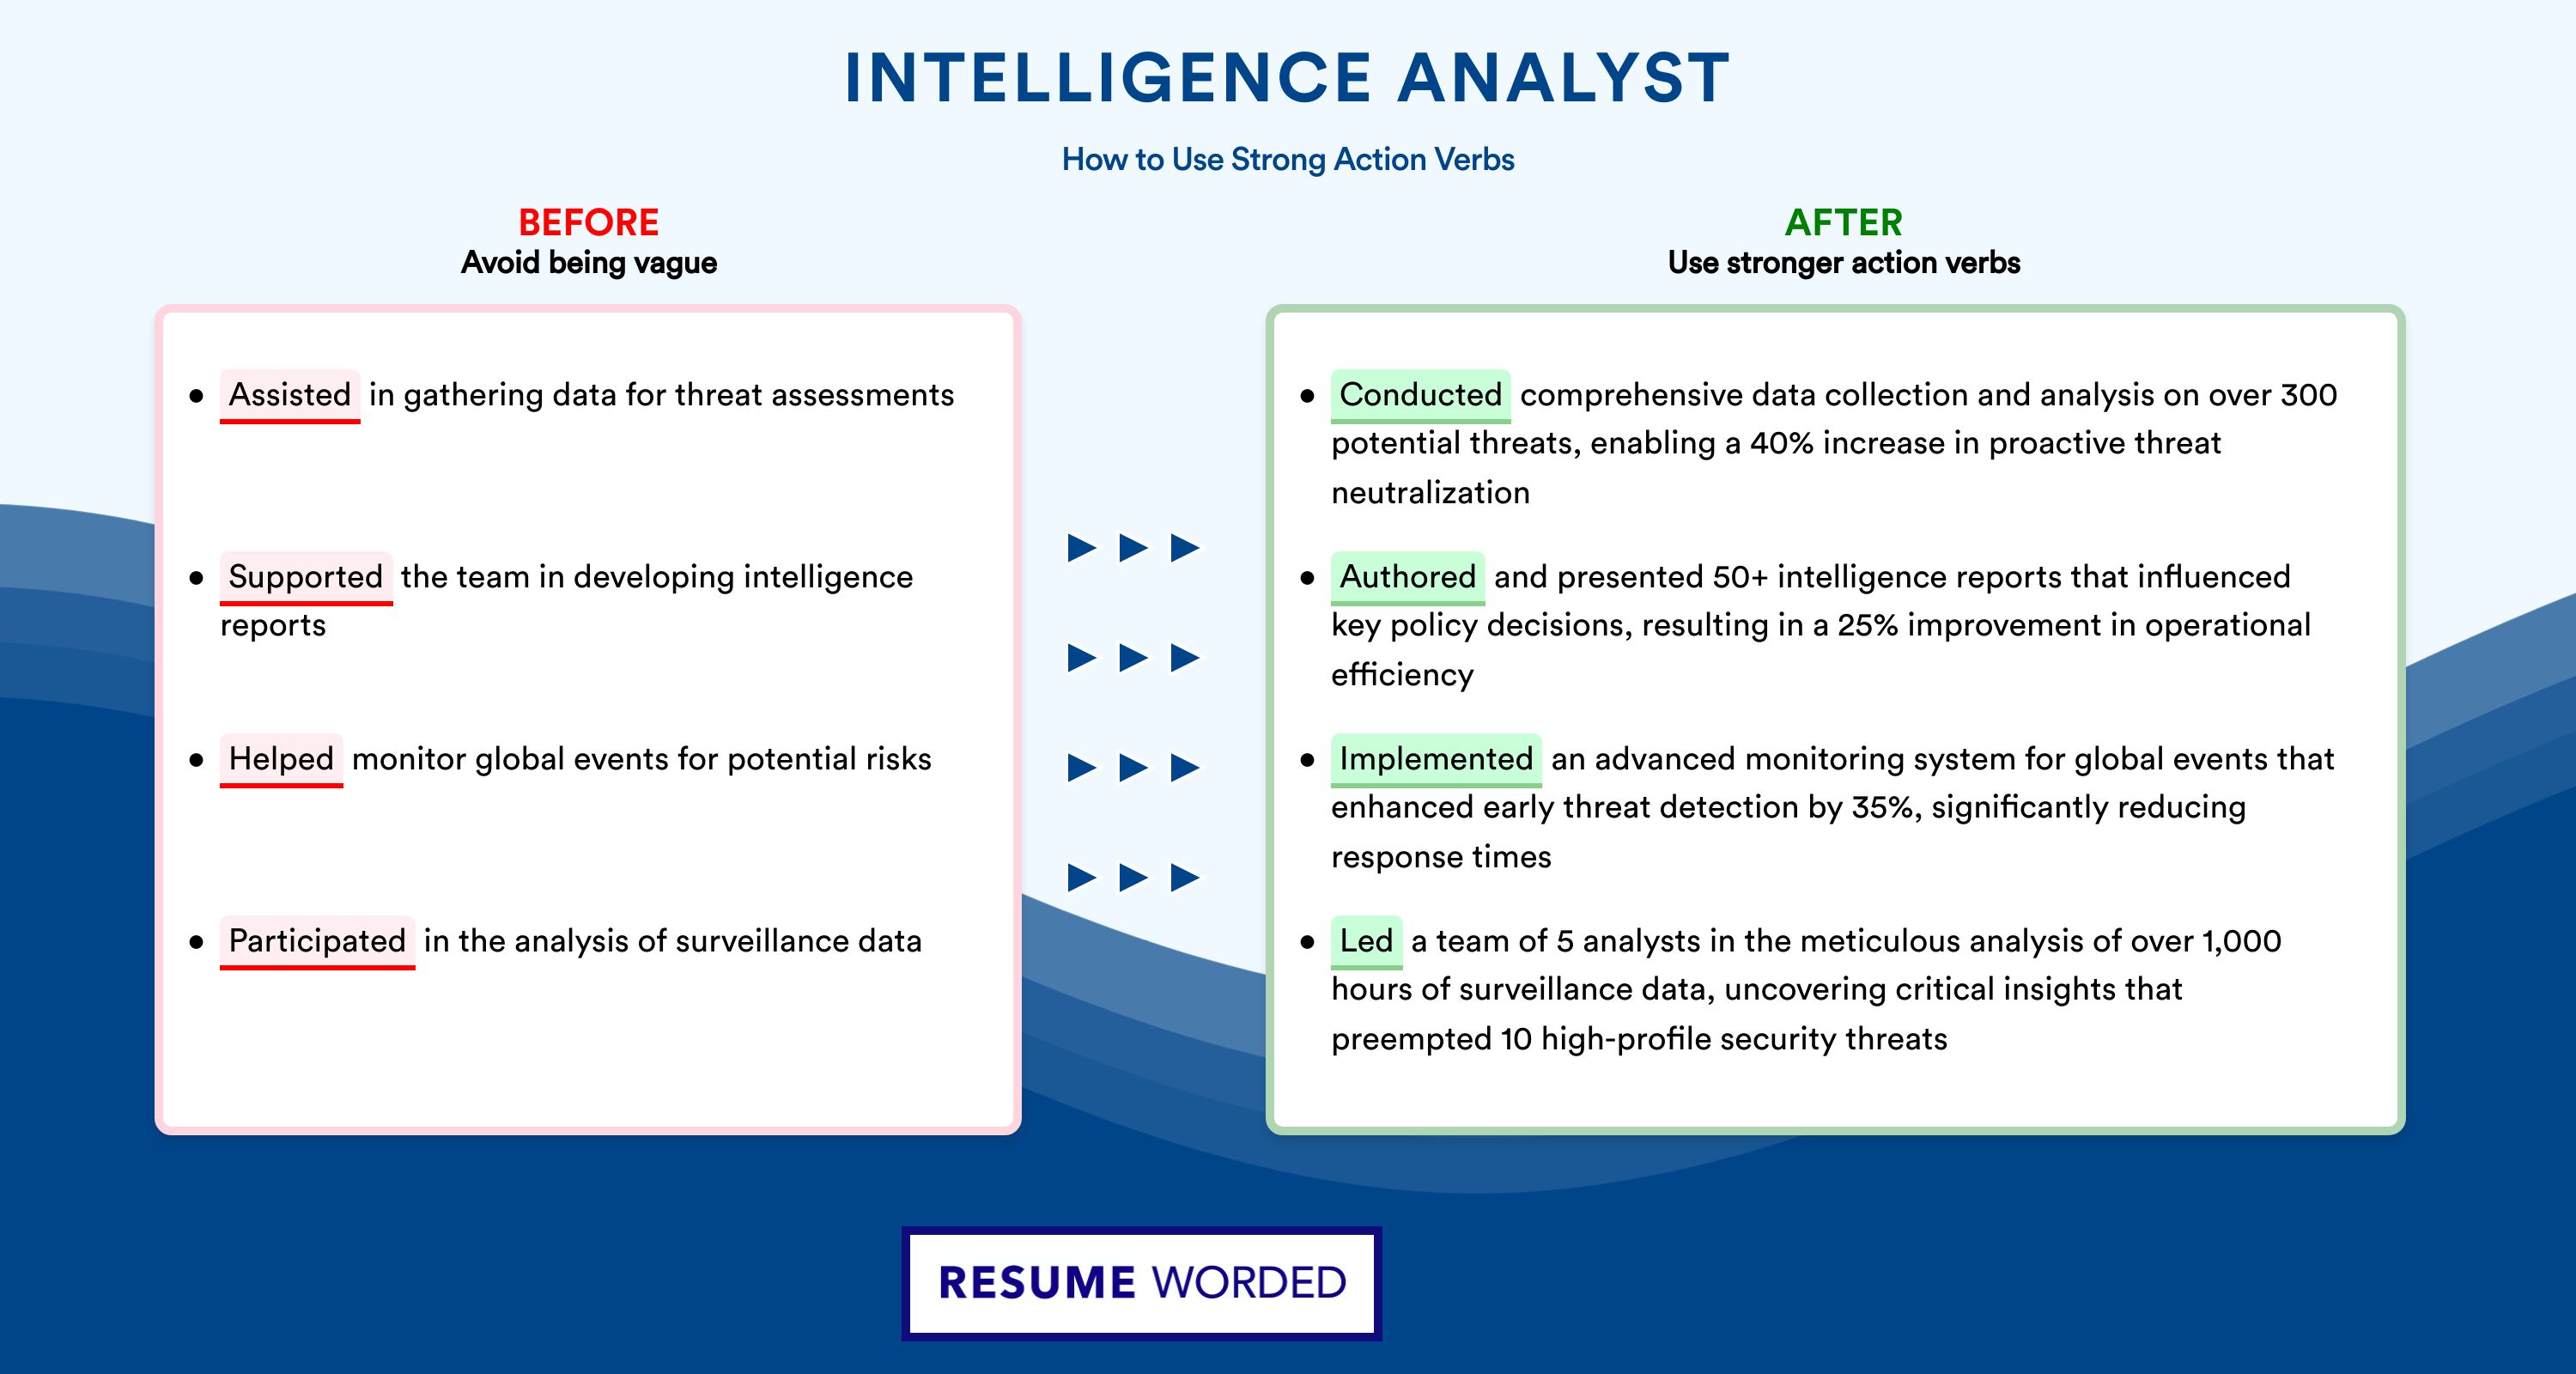 Action Verbs for Intelligence Analyst